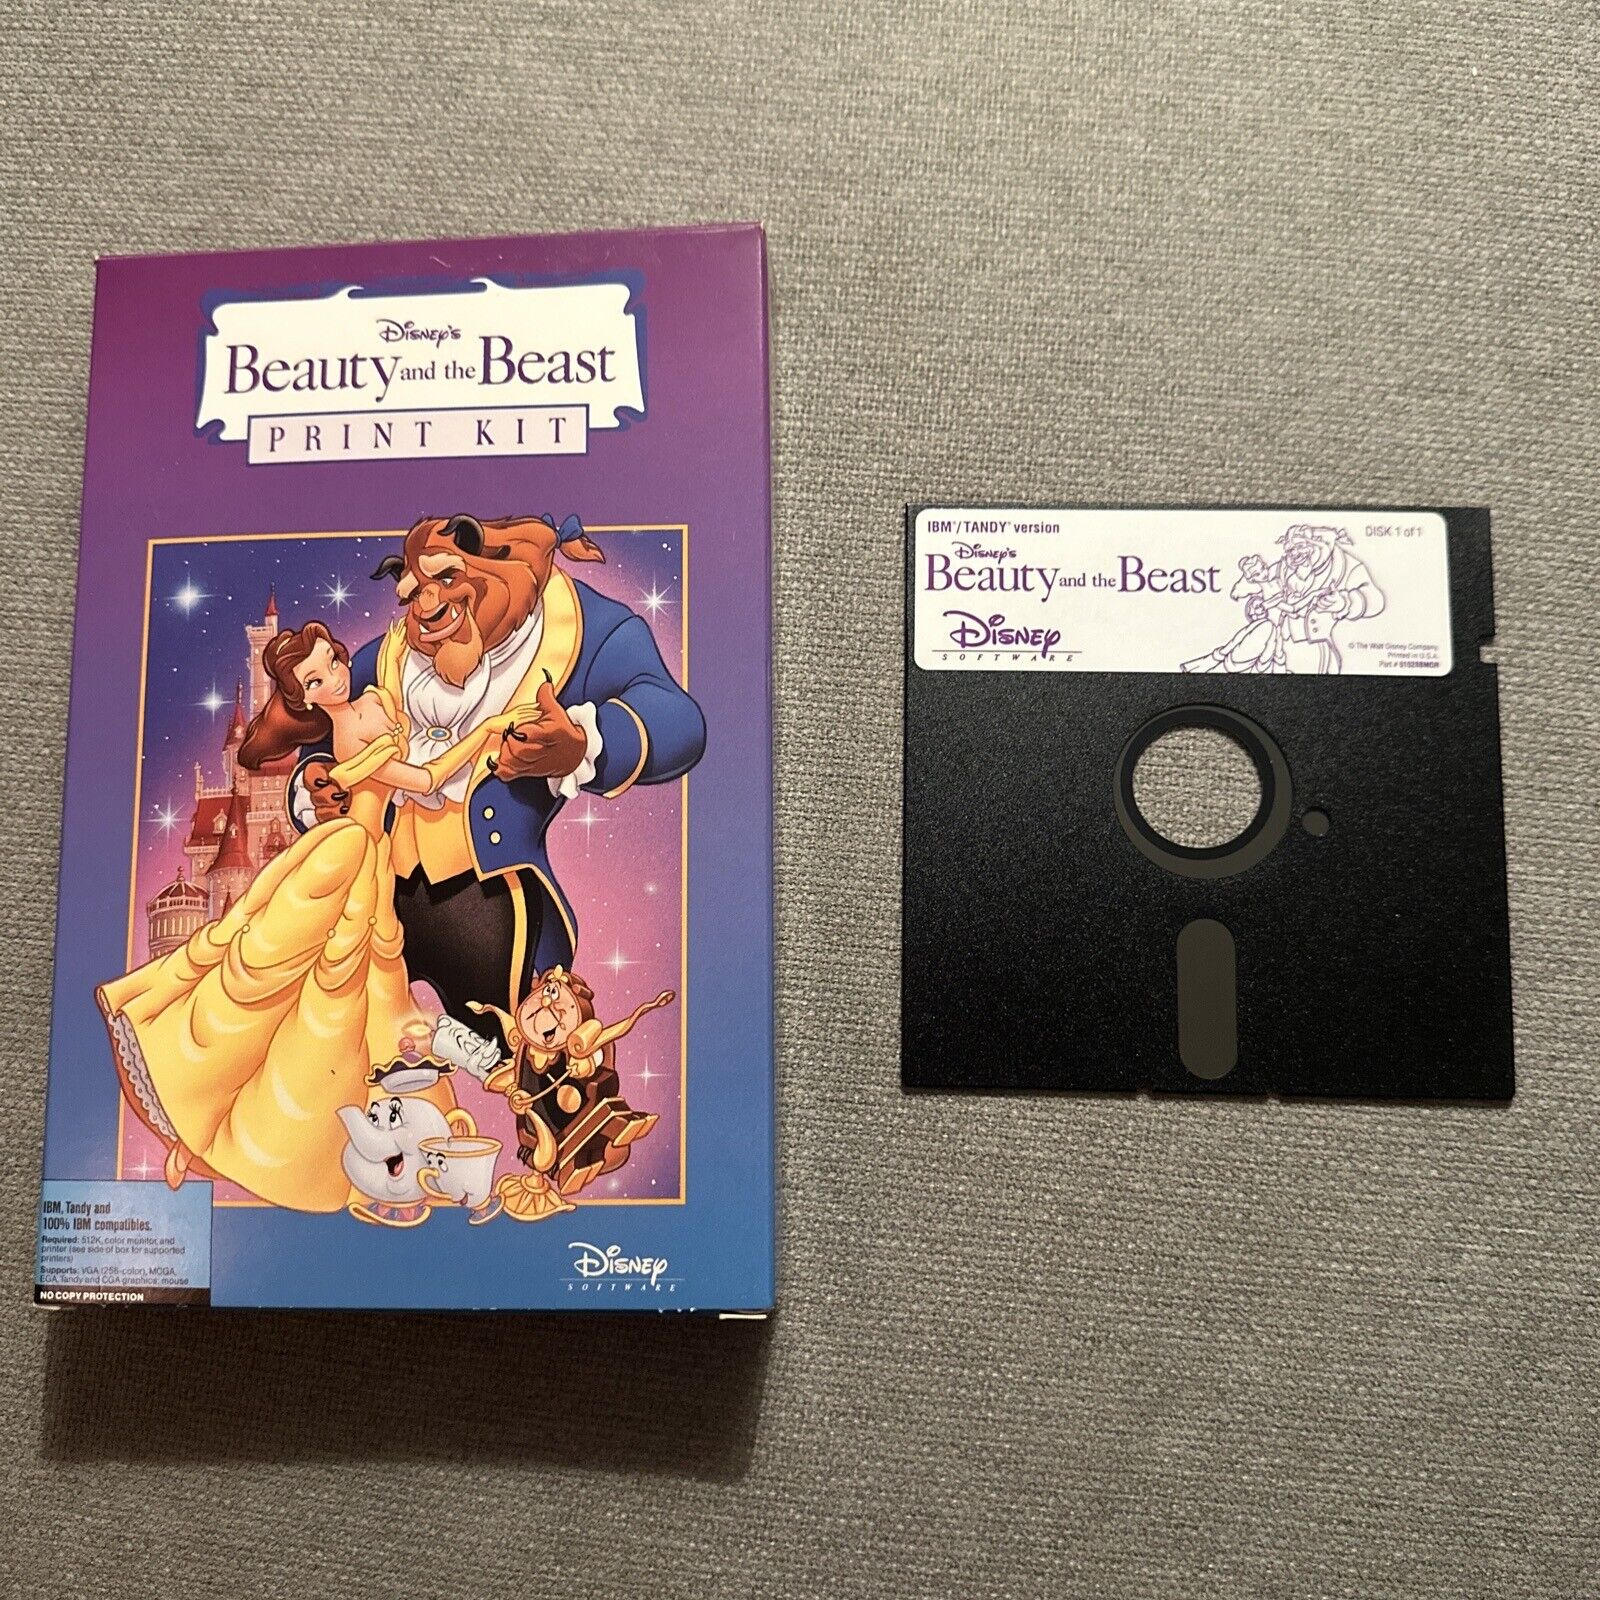 Beauty and the Beast Print Kit, Disney - IBM Tandy Version, Vintage PC Software 